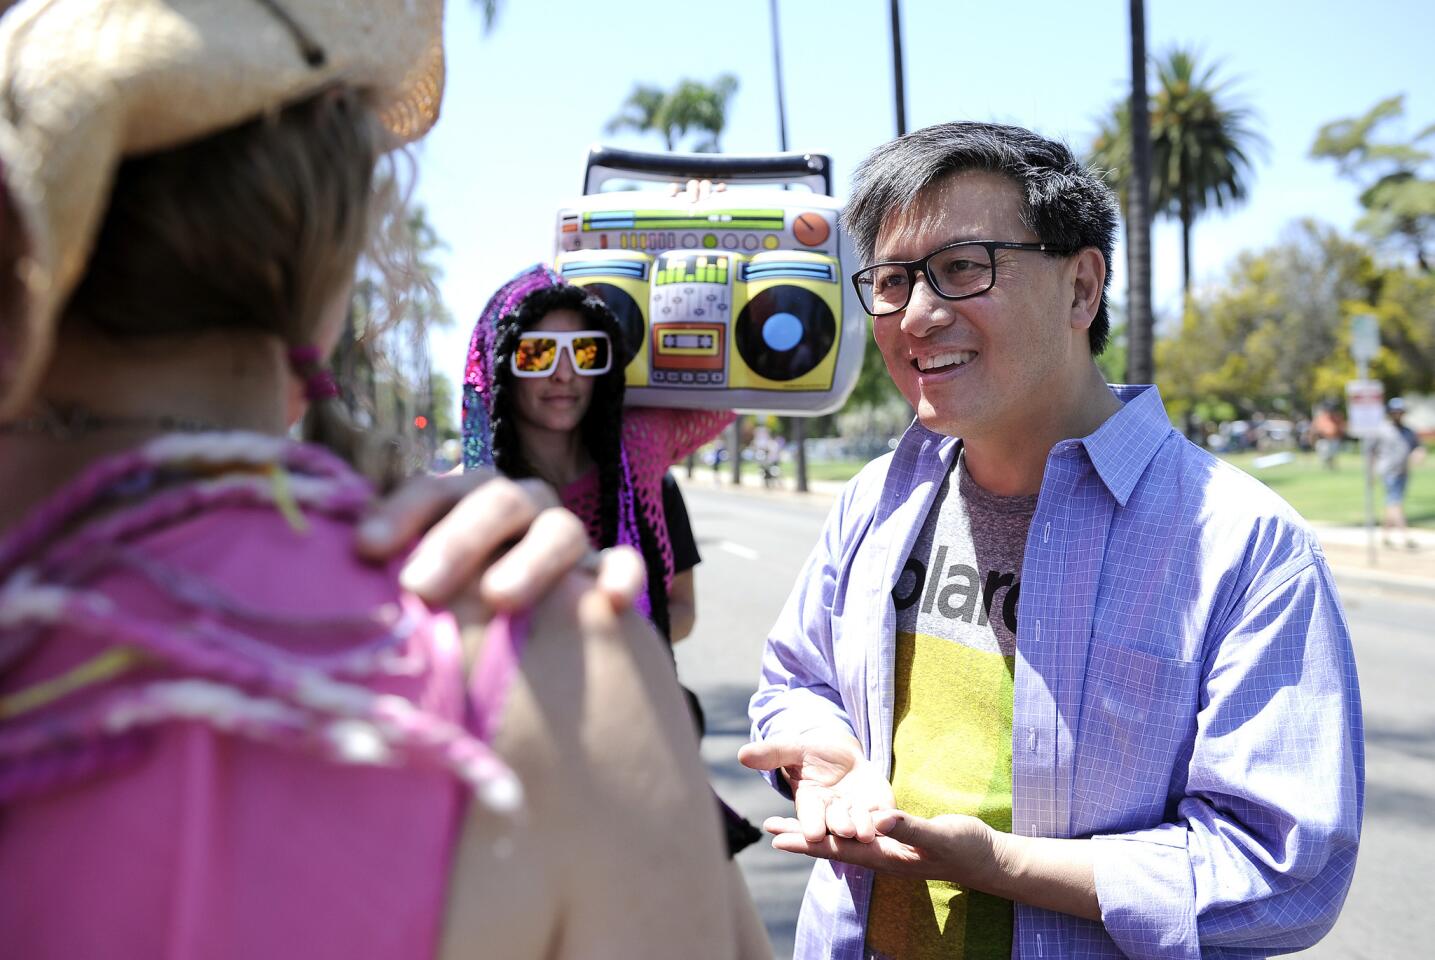 State Treasurer John Chiang, a Democratic candidate for governor, speaks with local resident Kimi Vandyk during a campaign stop at the Summer Solstice Festival in Santa Barbara on June 24.